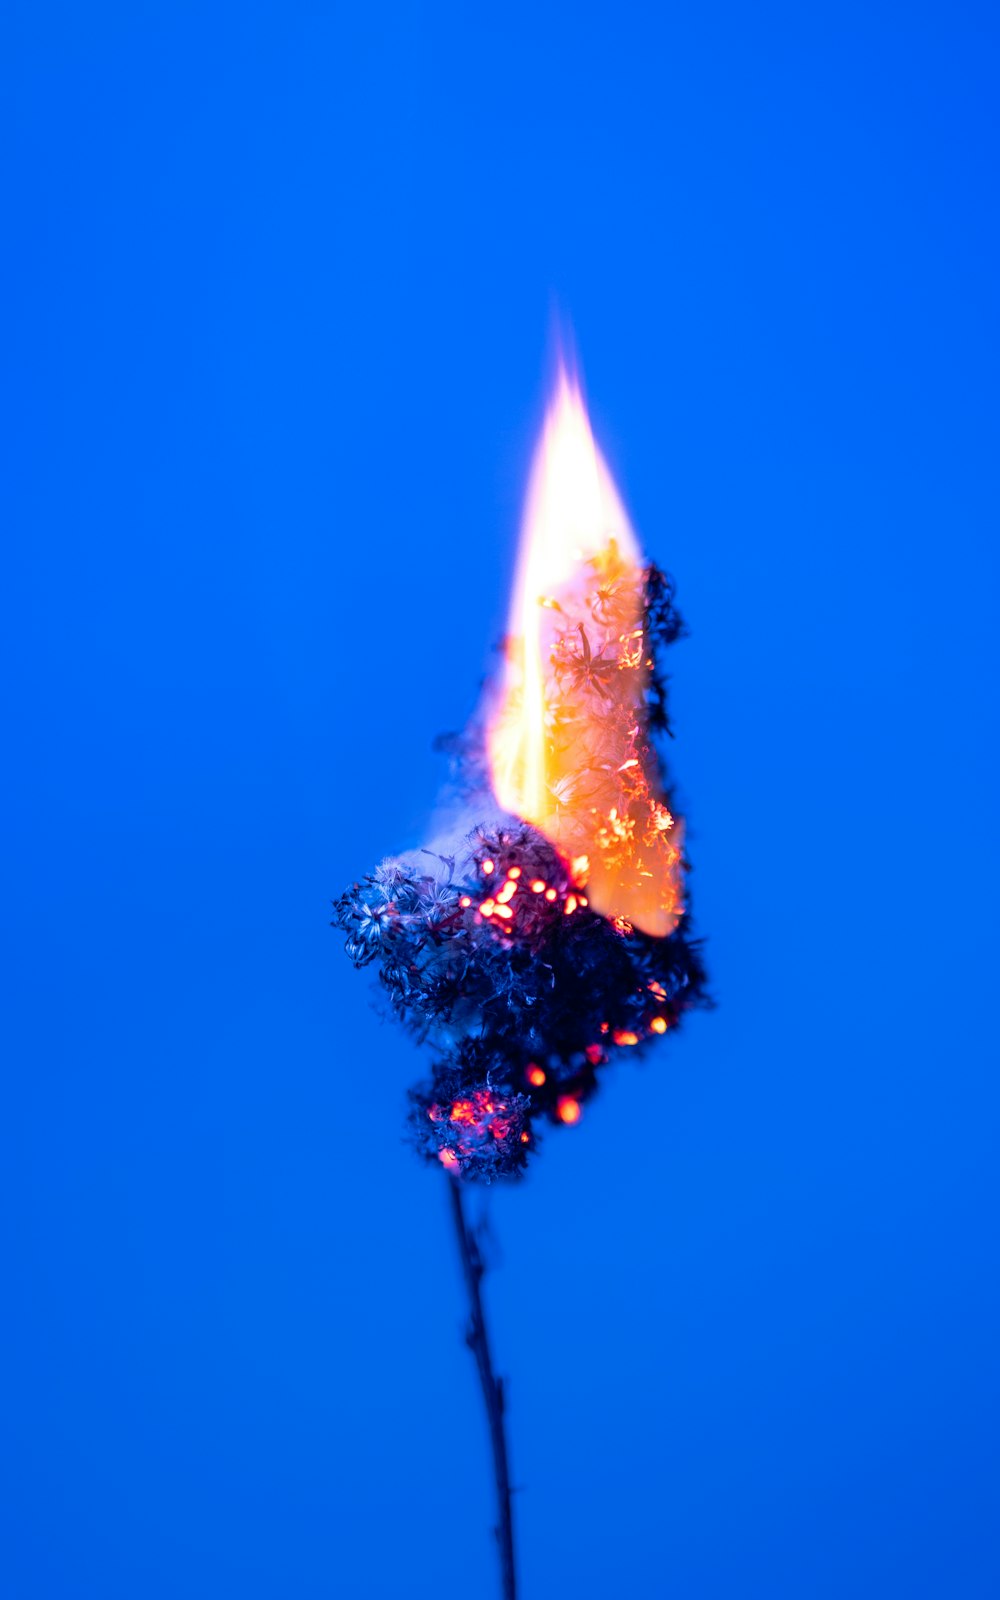 a fire burning in the middle of a blue sky